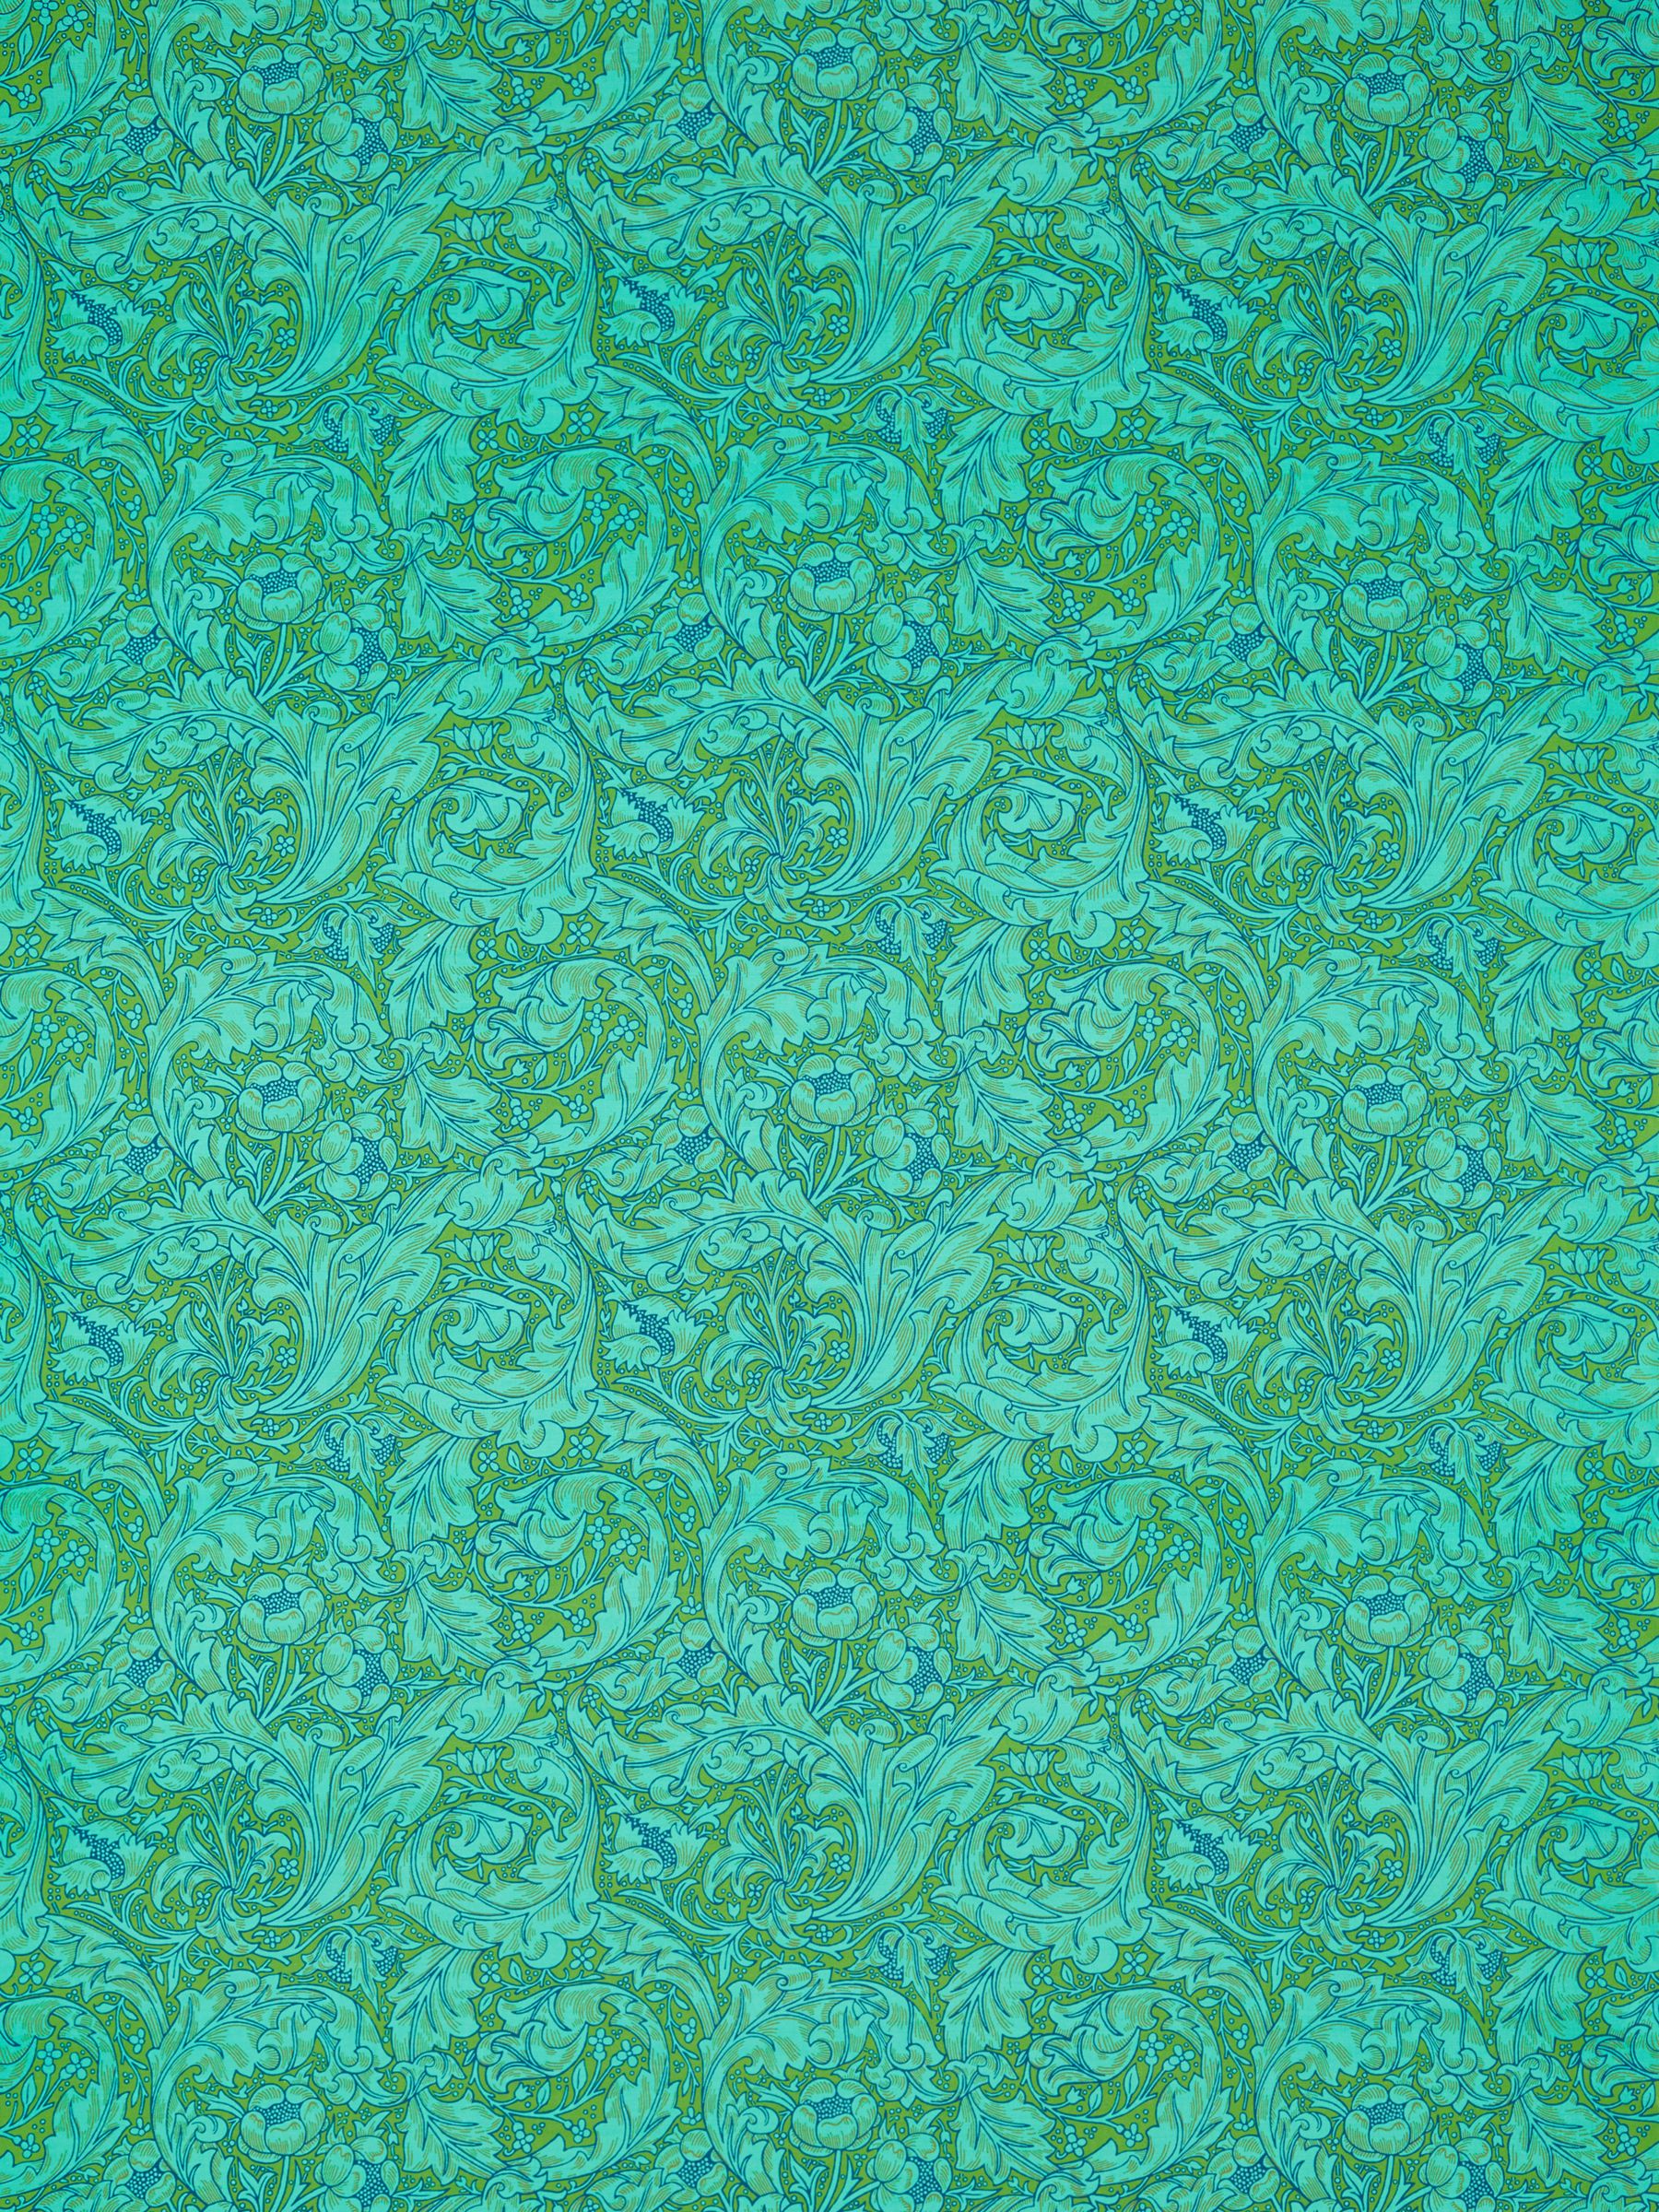 Morris & Co. Ben Pentreath Bachelors Button Furnishing Fabric, Olive/Turquoise